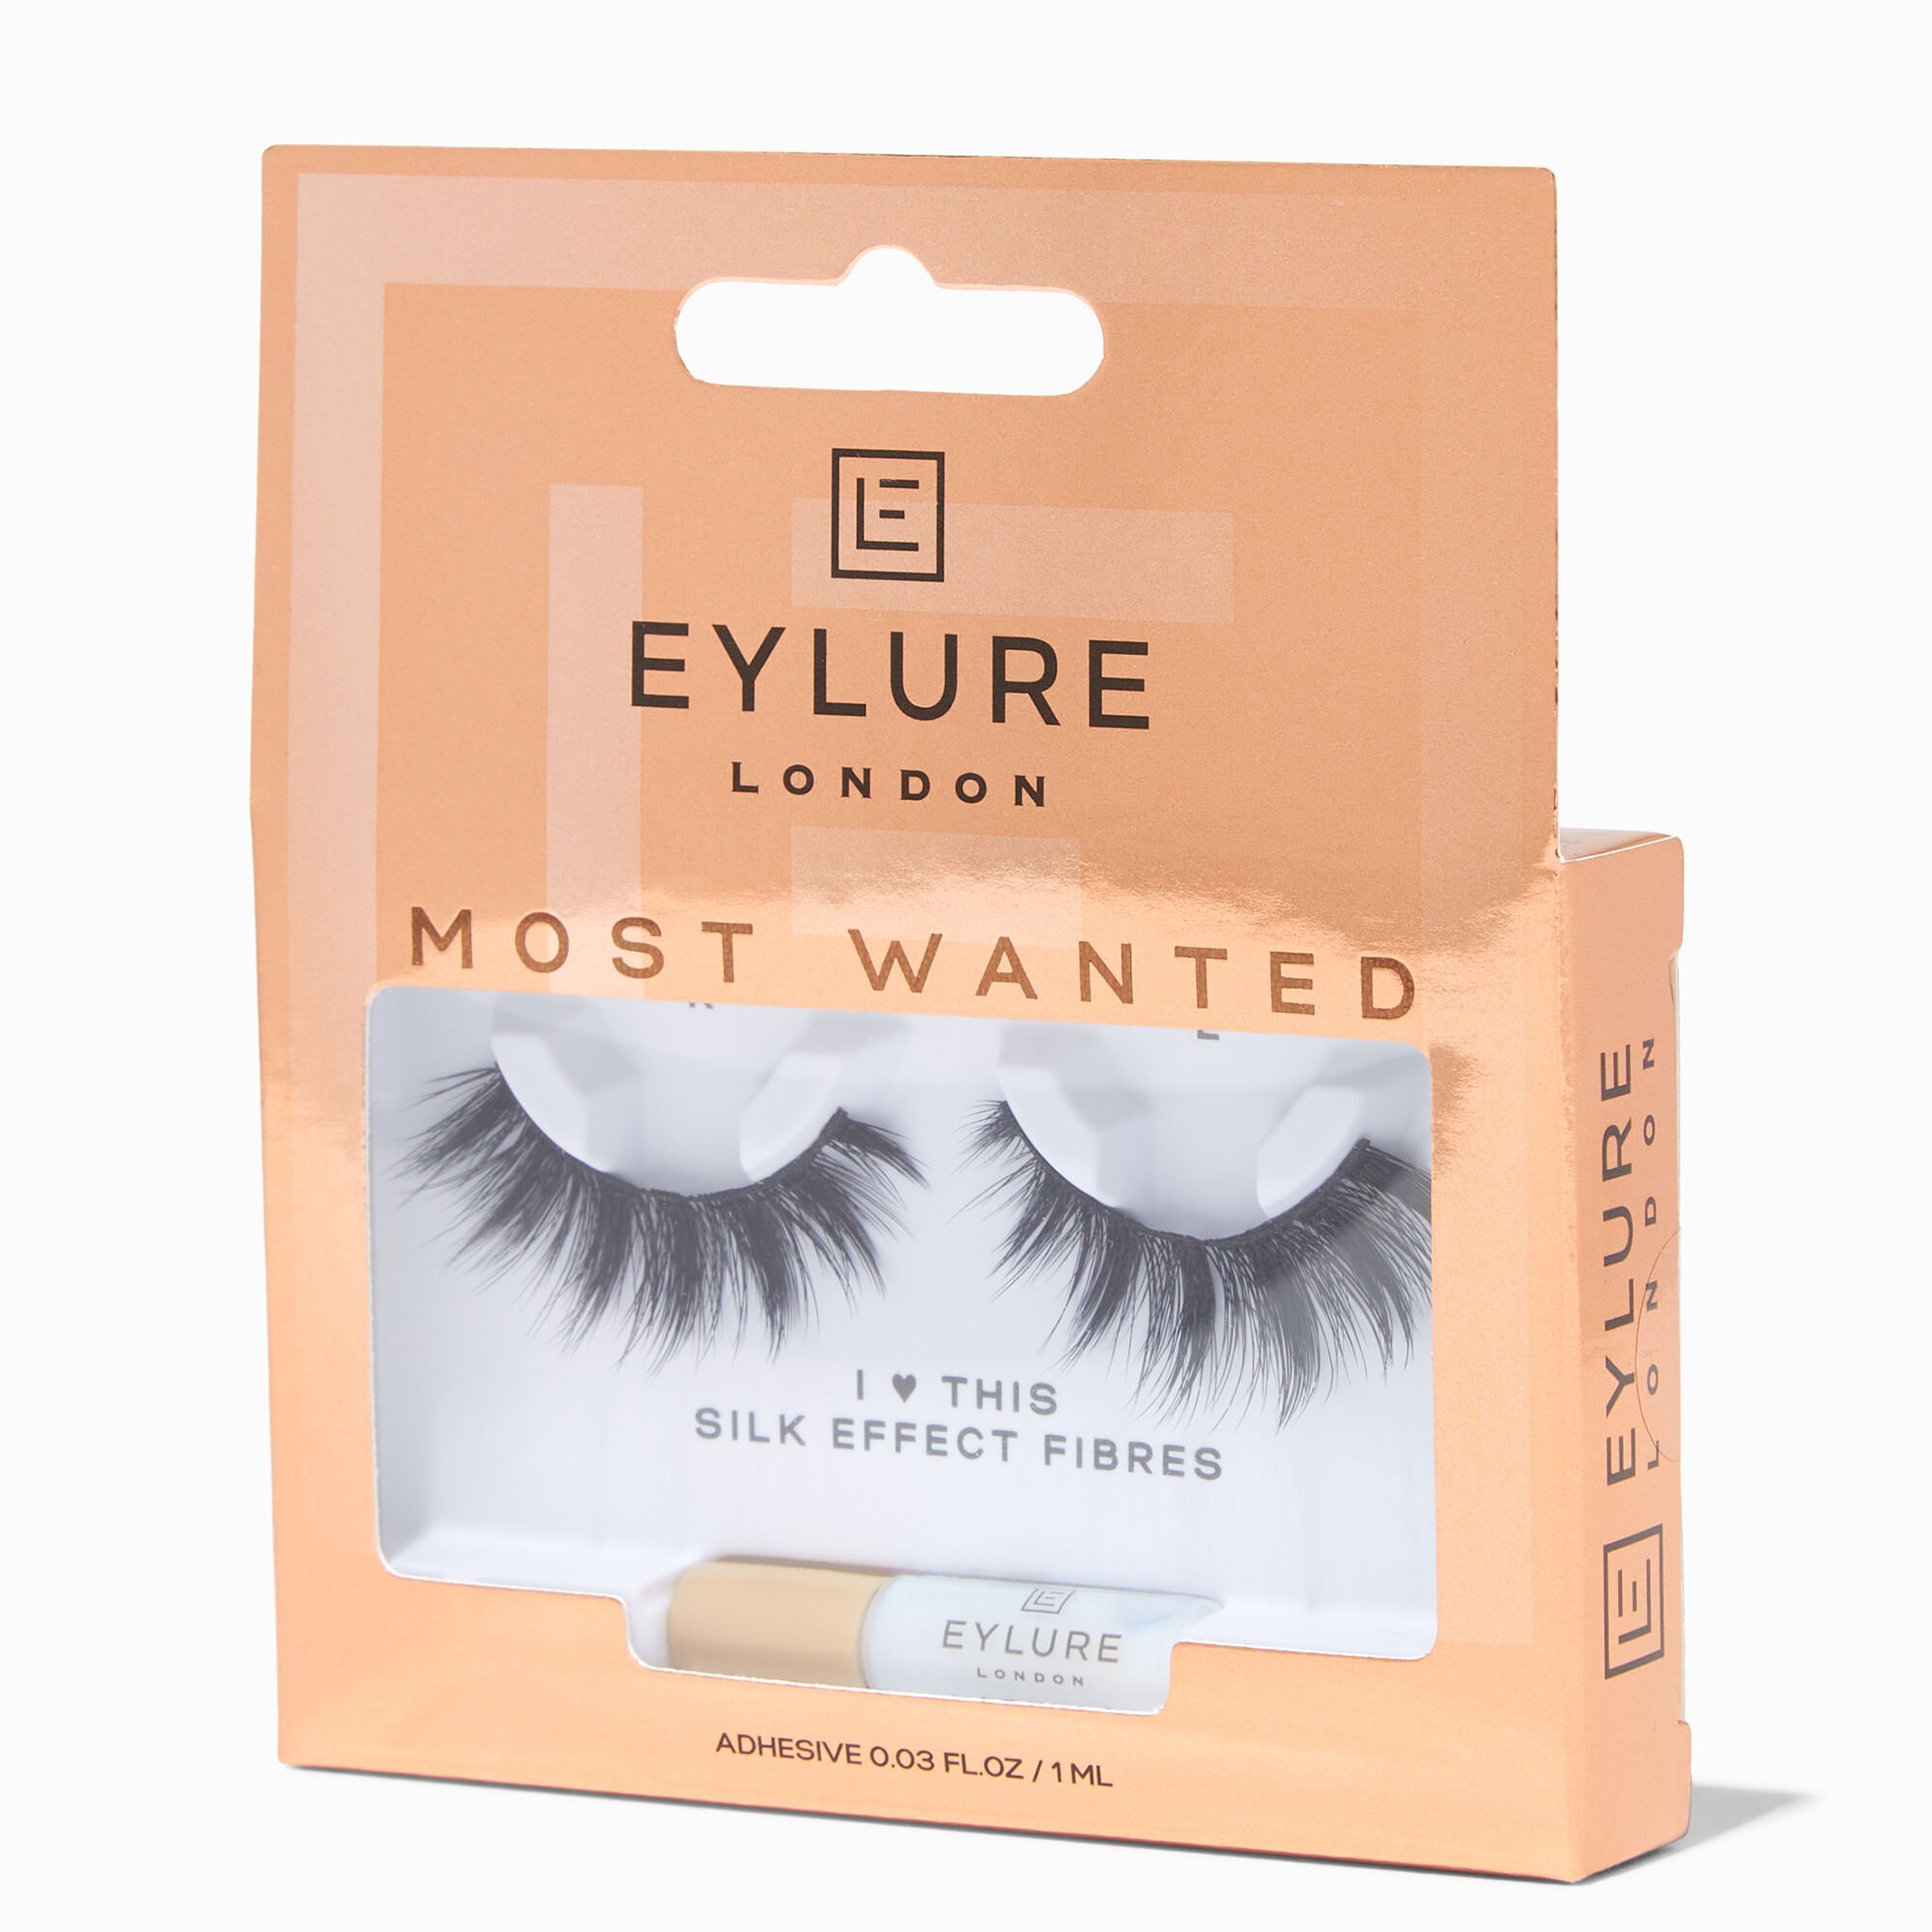 View Claires Eylure Most Wanted Faux Mink Eyelashes I 3 This Black information